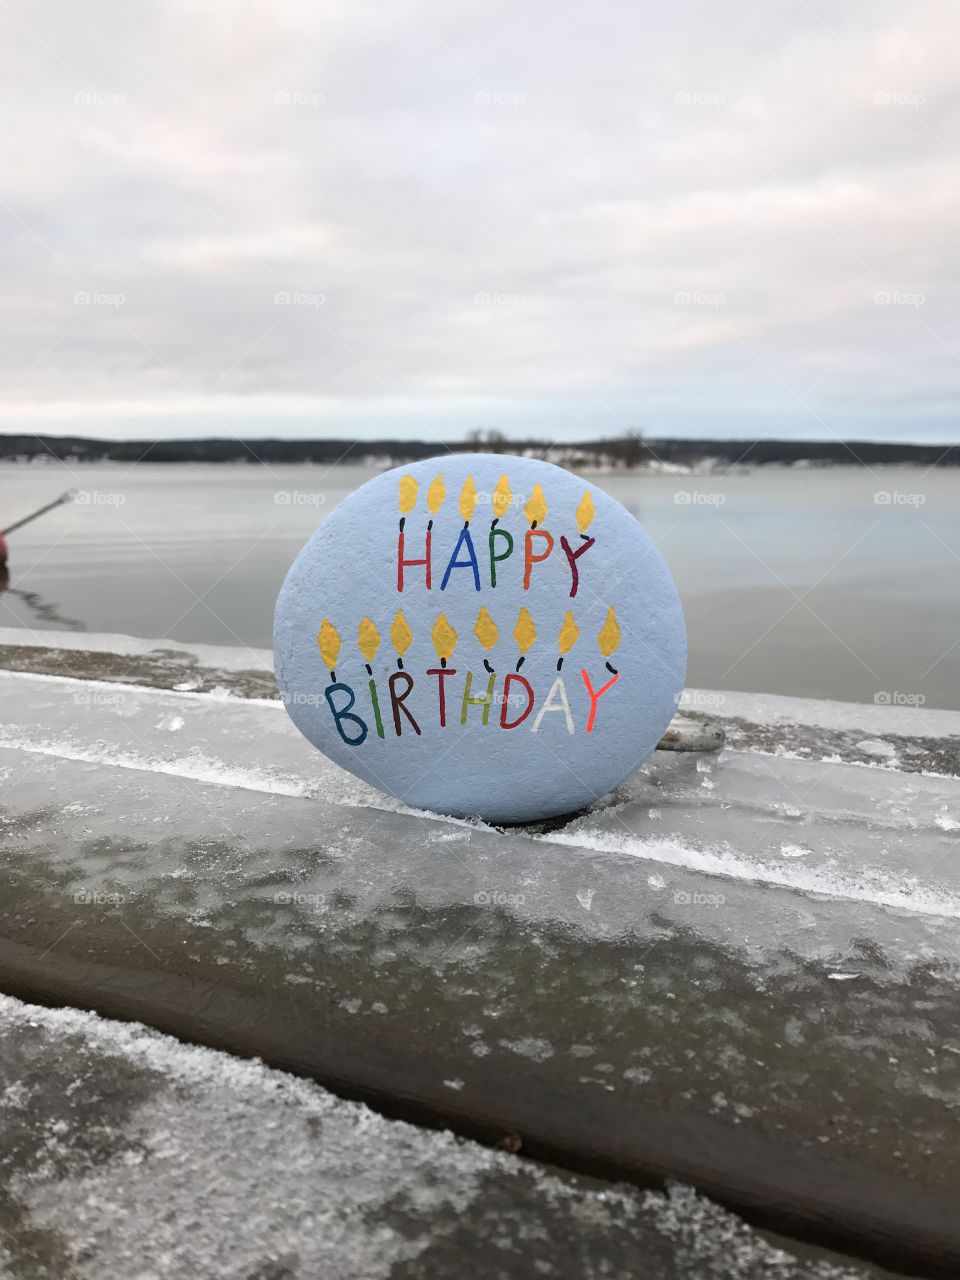 Happy Birthday stone with Baltic see background